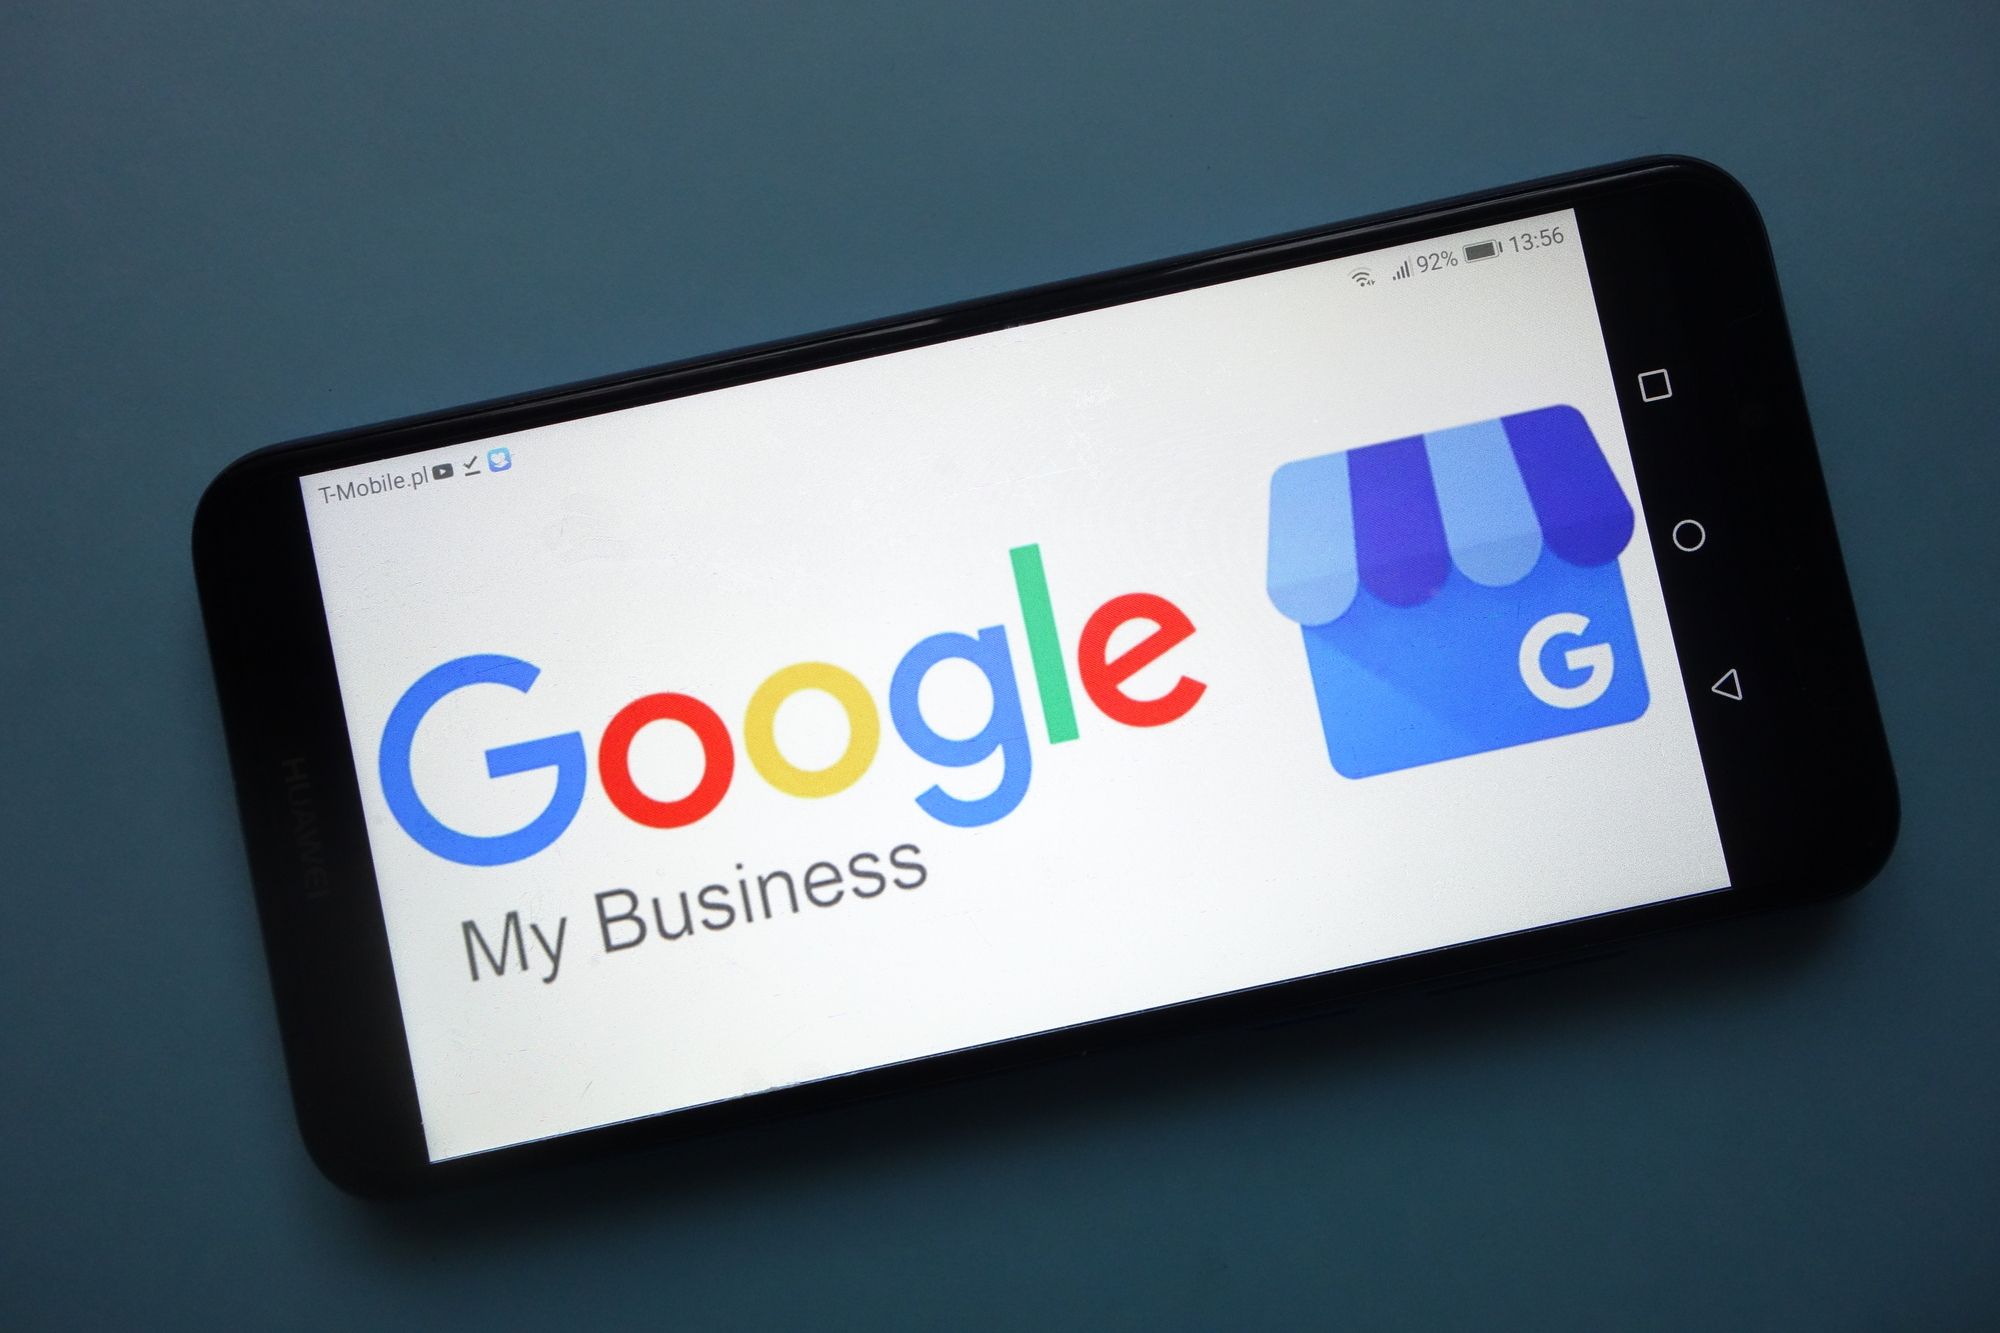 How to manage and edit your Google Business Profile from Google search